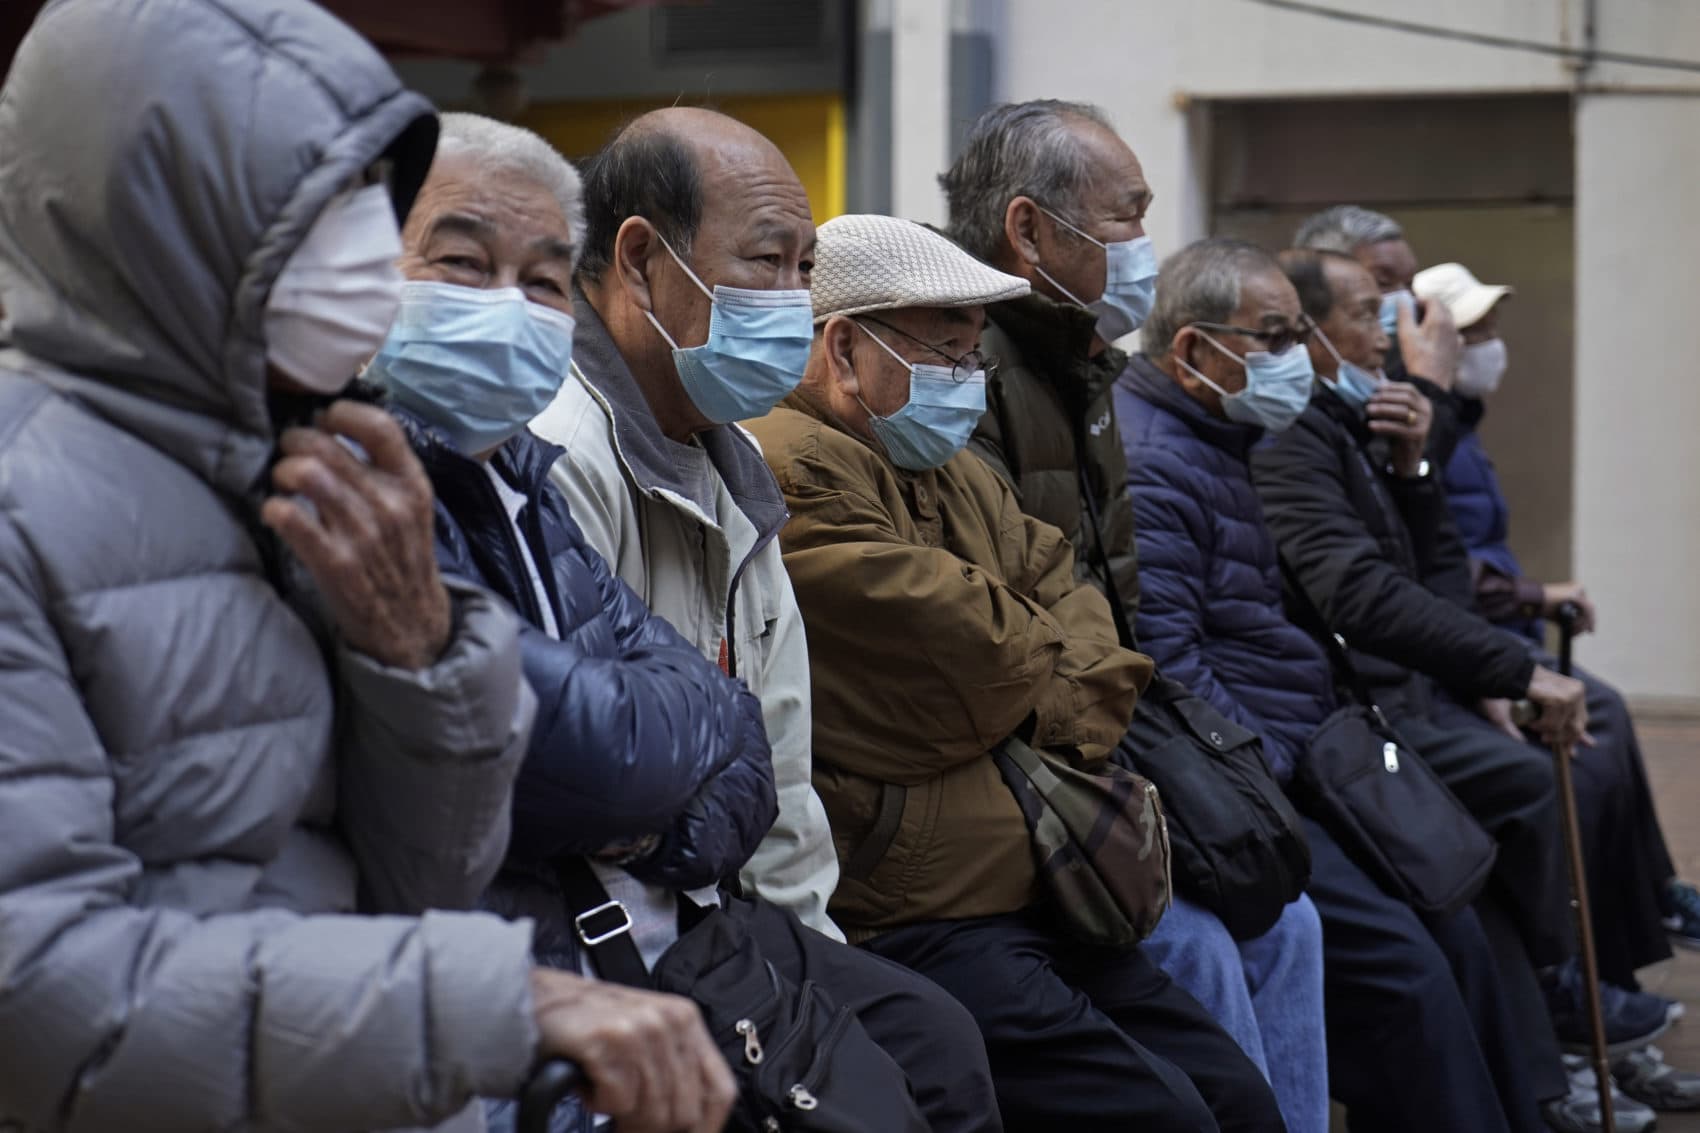 q&a: what to know about wearing a mask against the coronavirus ...